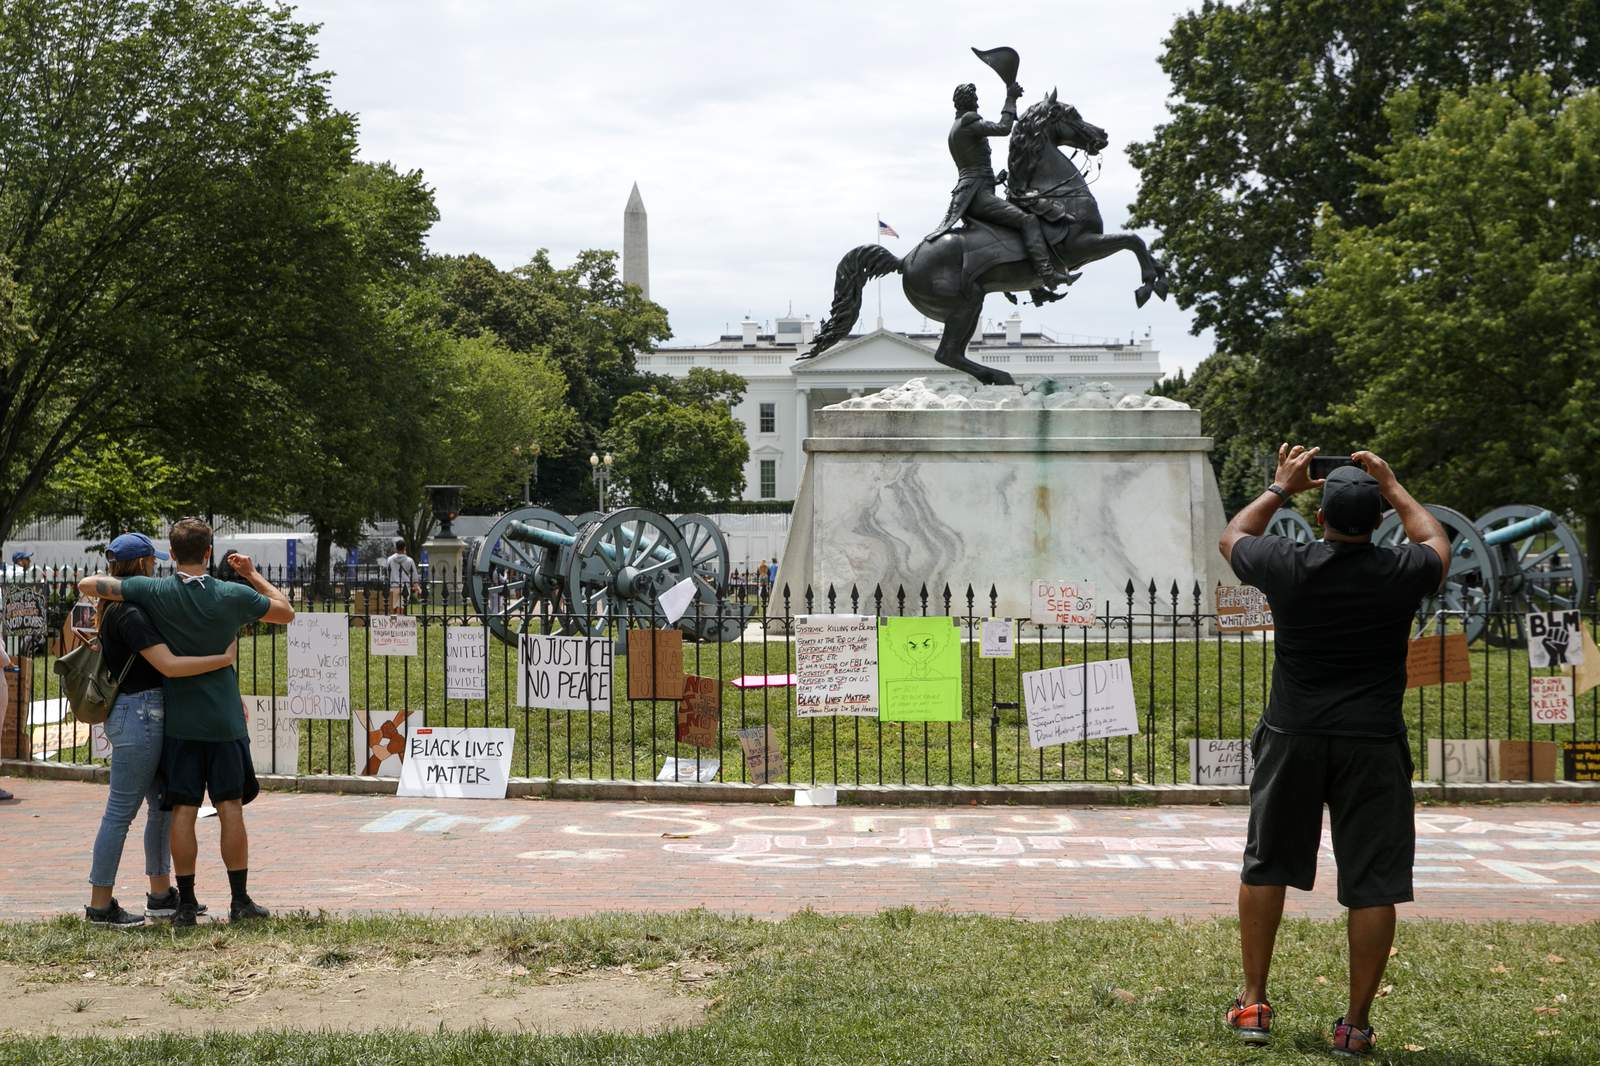 Lafayette Square could decide Trump's legacy  and election